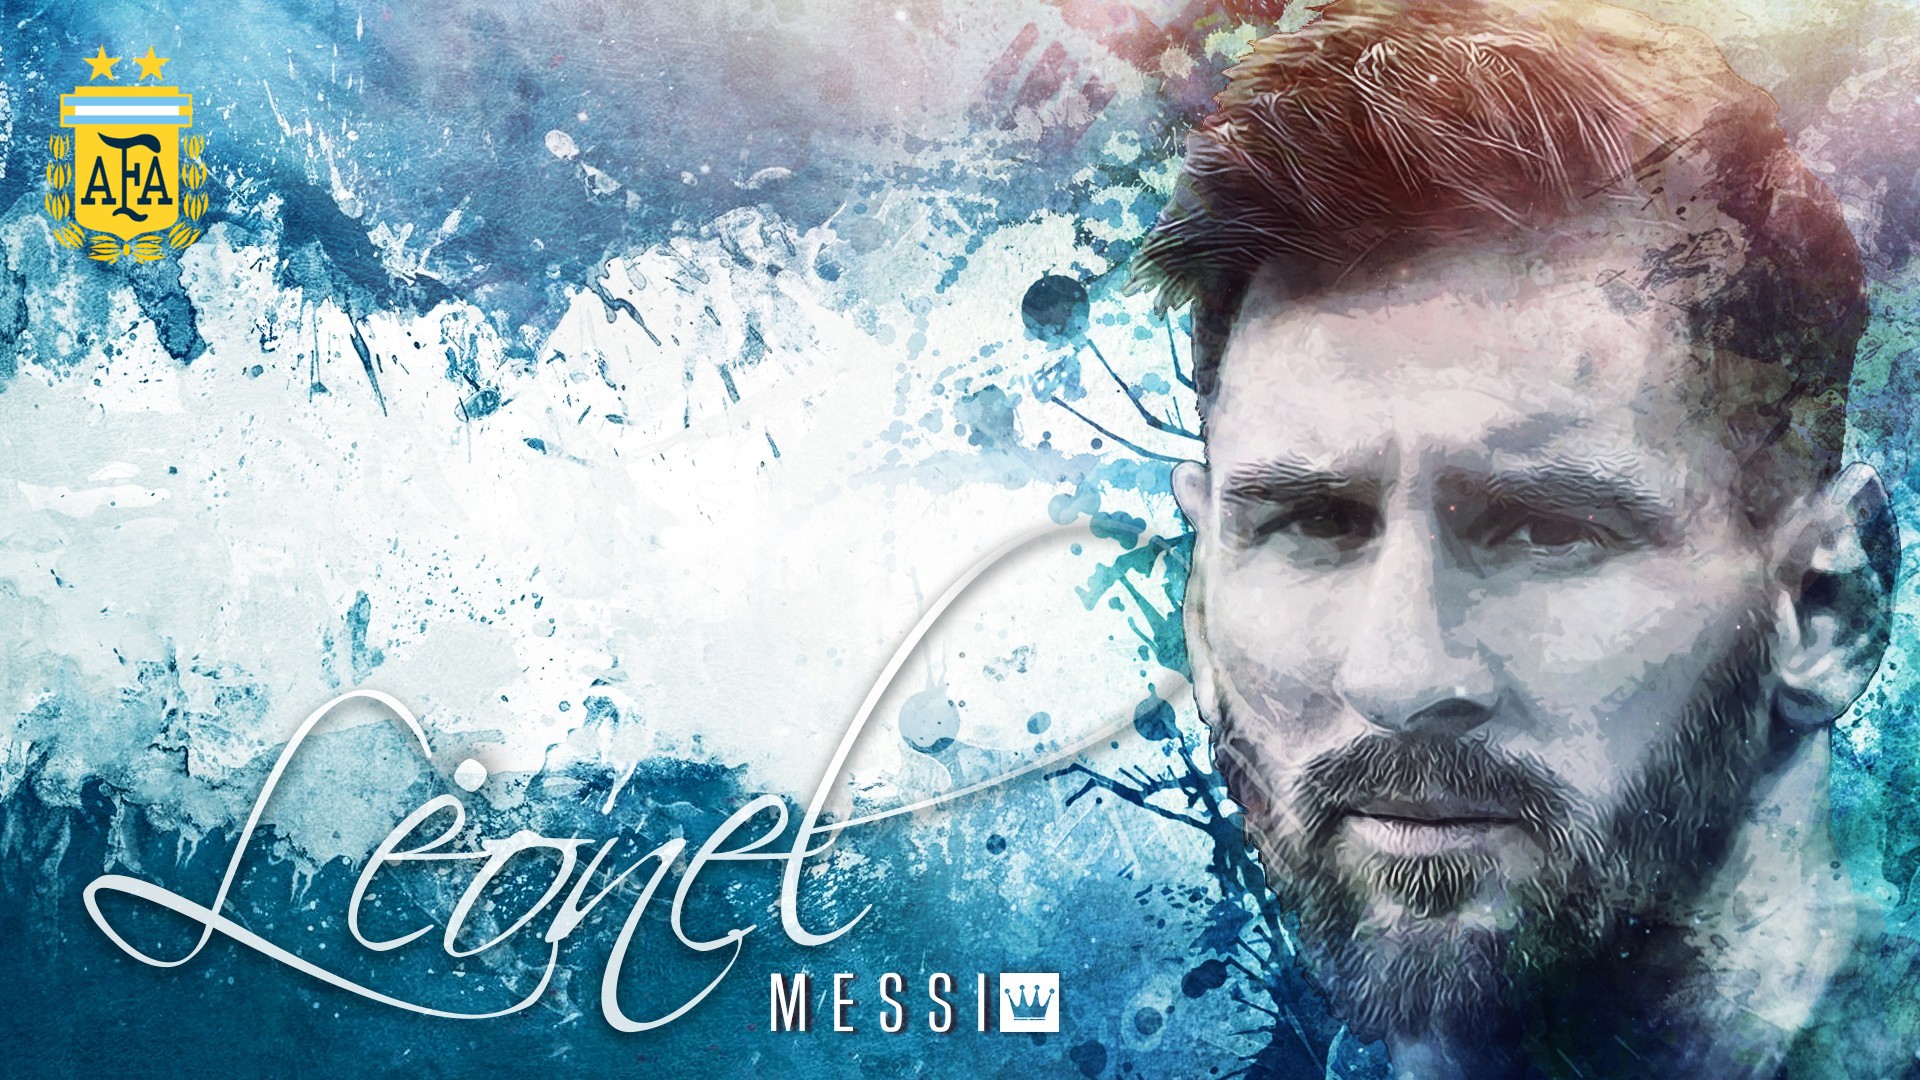 Wallpaper Desktop Messi Argentina HD with resolution 1920x1080 pixel. You can make this wallpaper for your Mac or Windows Desktop Background, iPhone, Android or Tablet and another Smartphone device